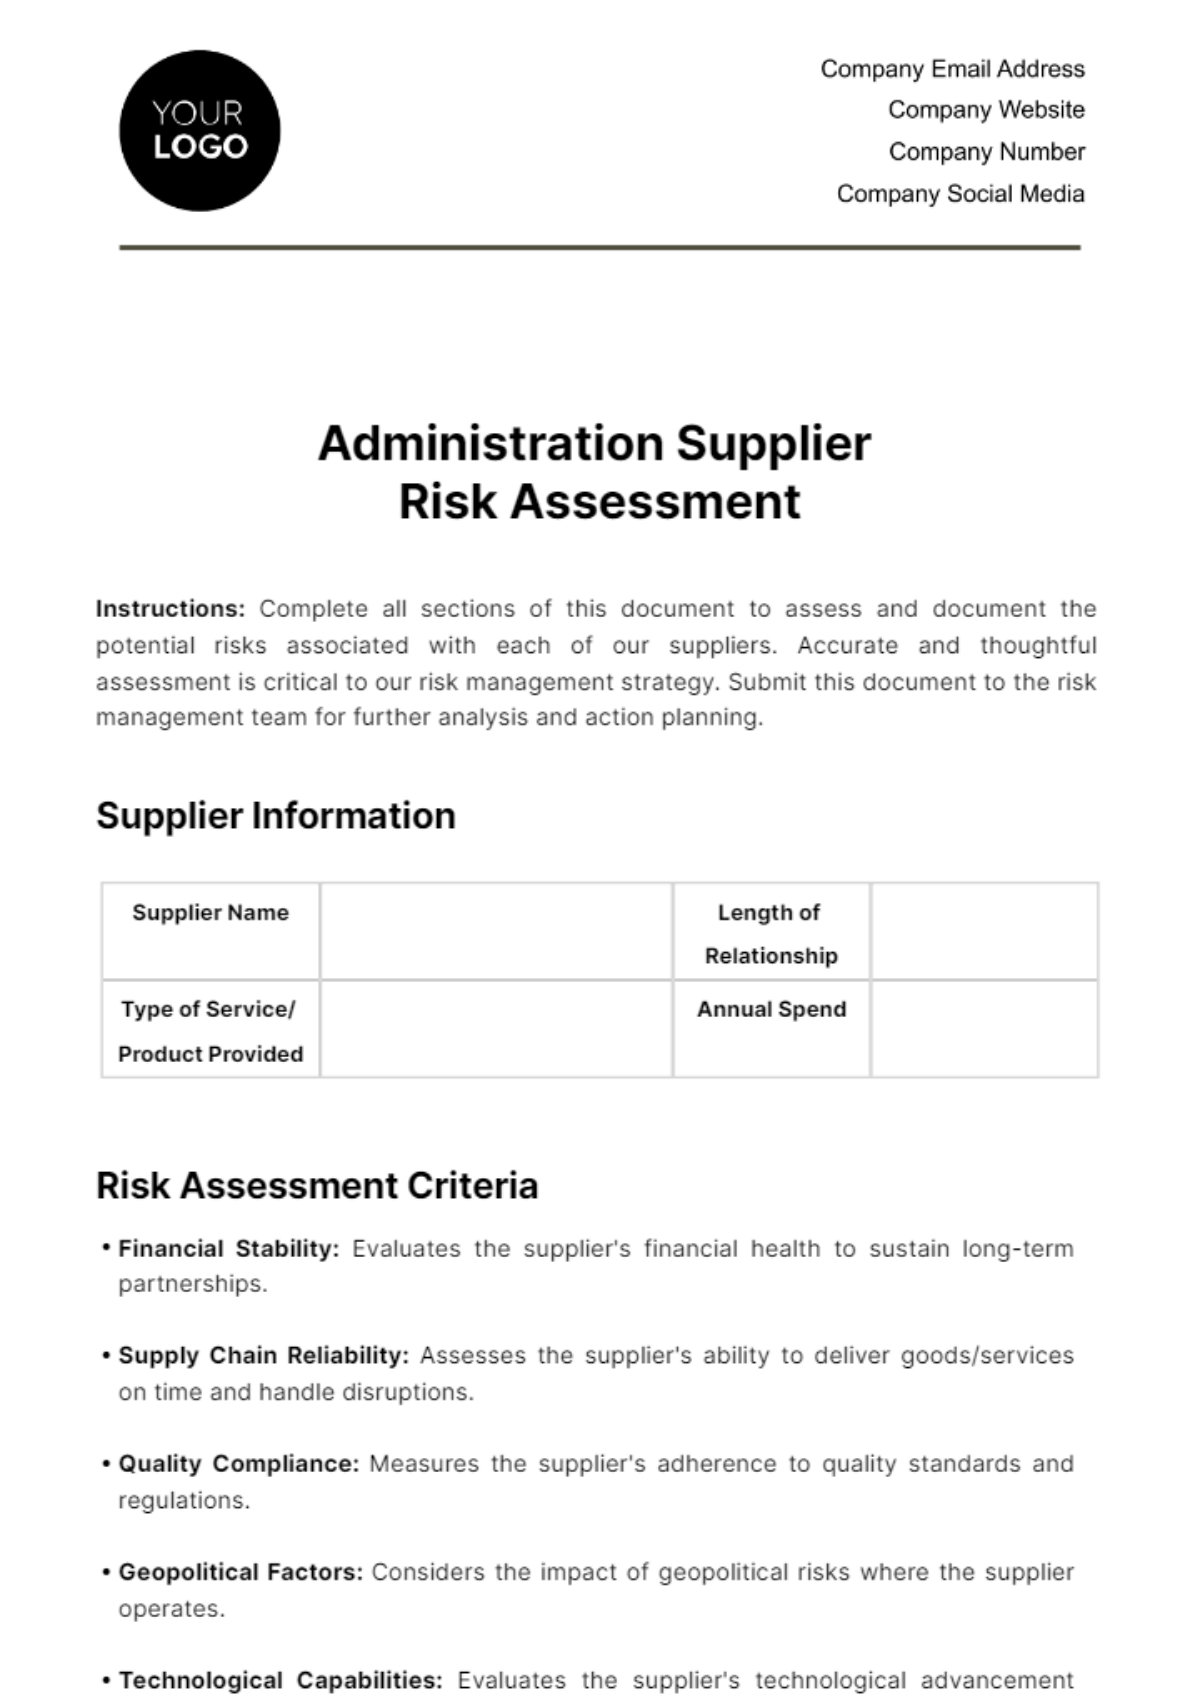 Free Administration Supplier Risk Assessment Template